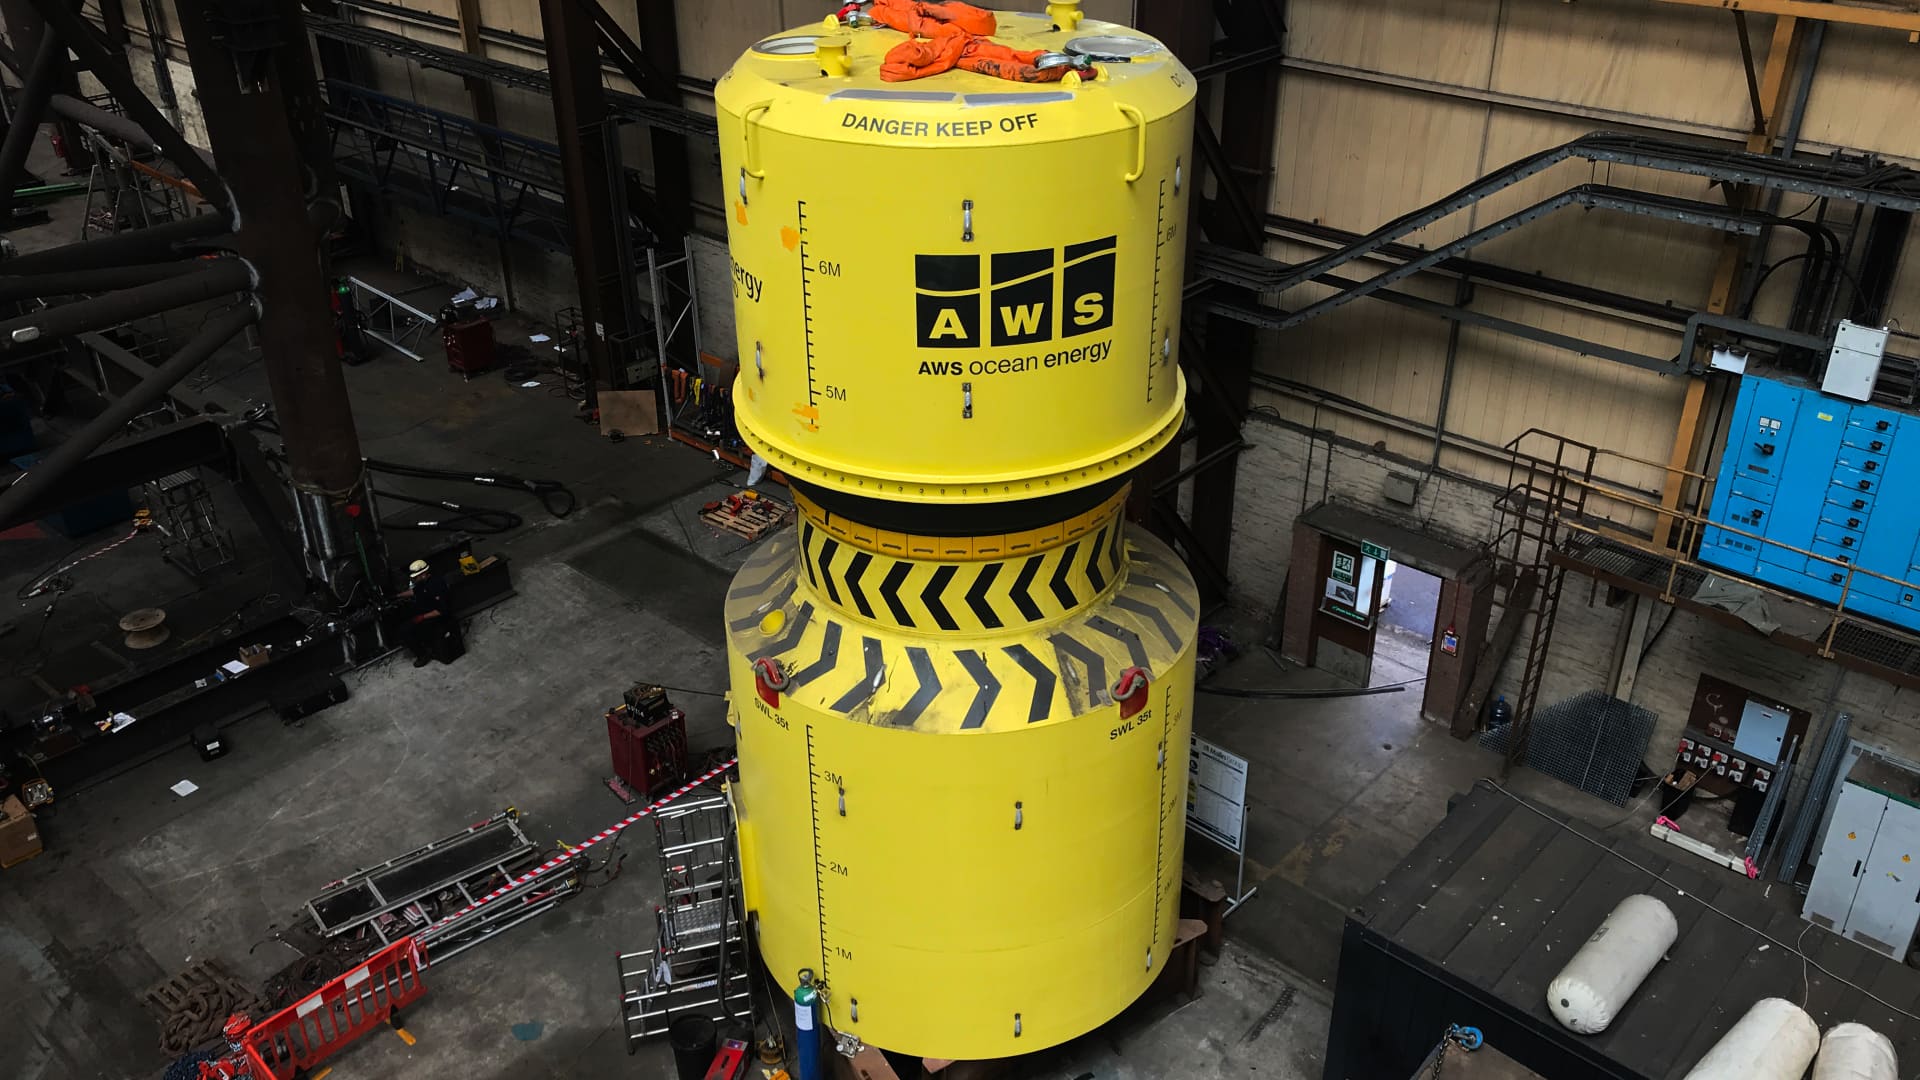 Wave energy device put through its paces during trials in Scotland